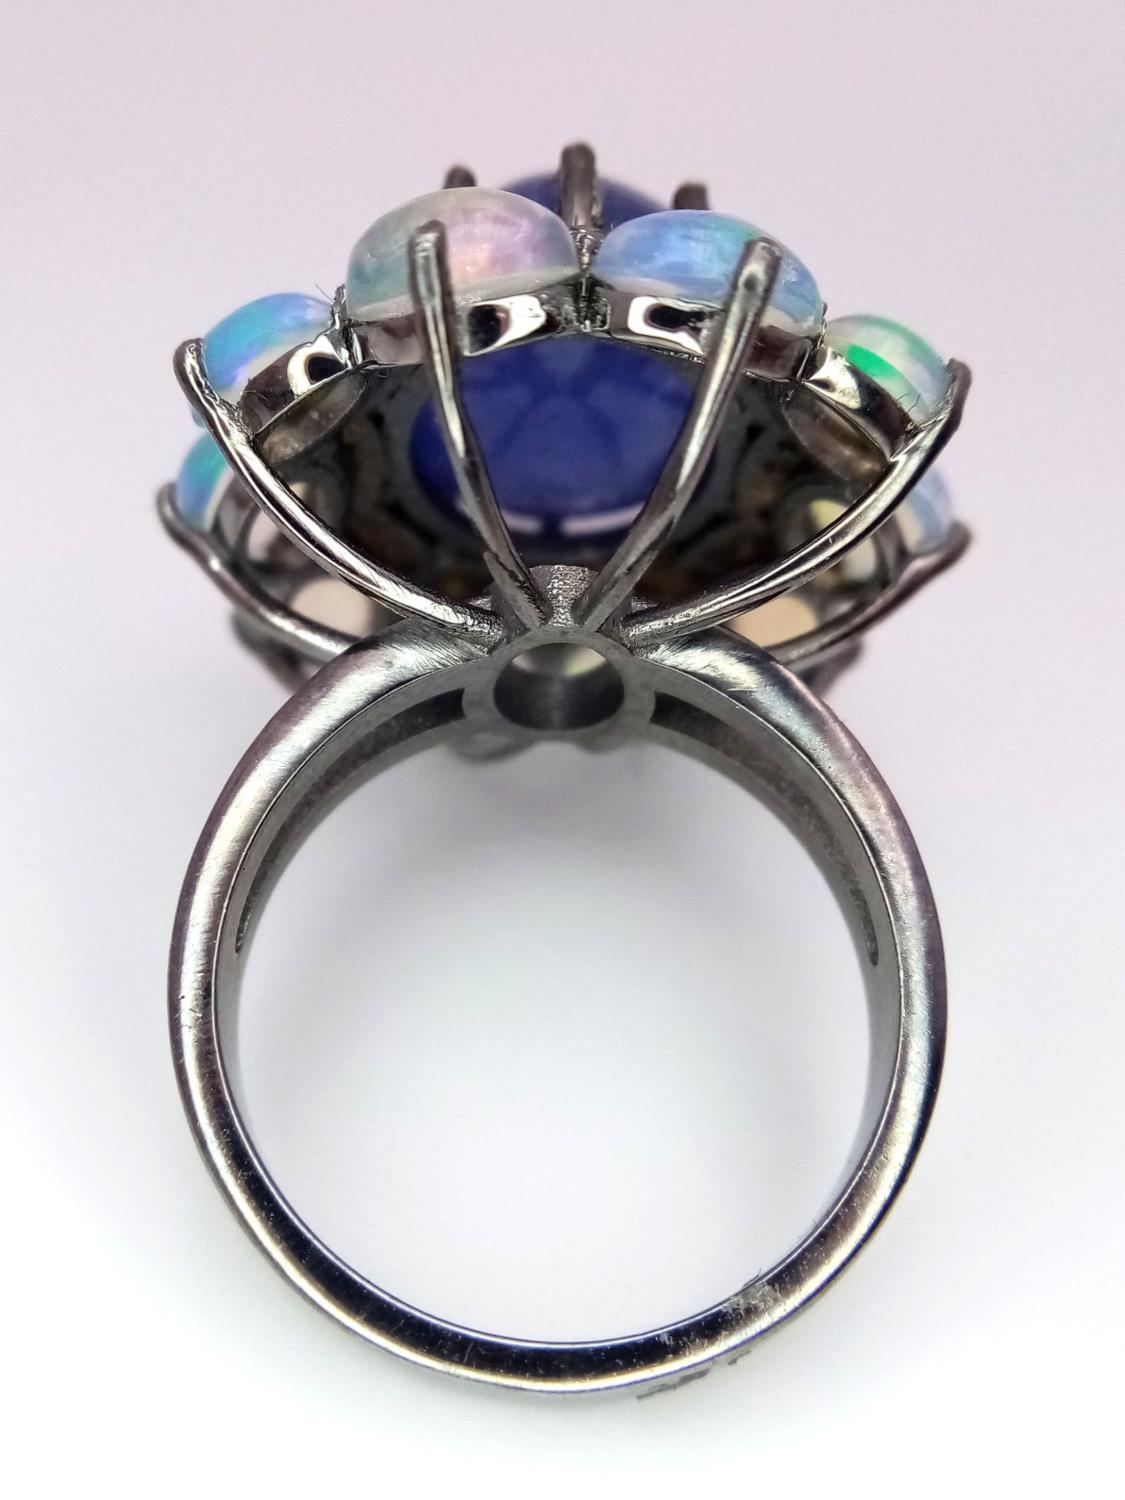 A 10ct Tanzanite Gemstone Dress Ring with 3ctw Opal Surround and 0.50ctw of Diamond Accents. Size N. - Bild 4 aus 5